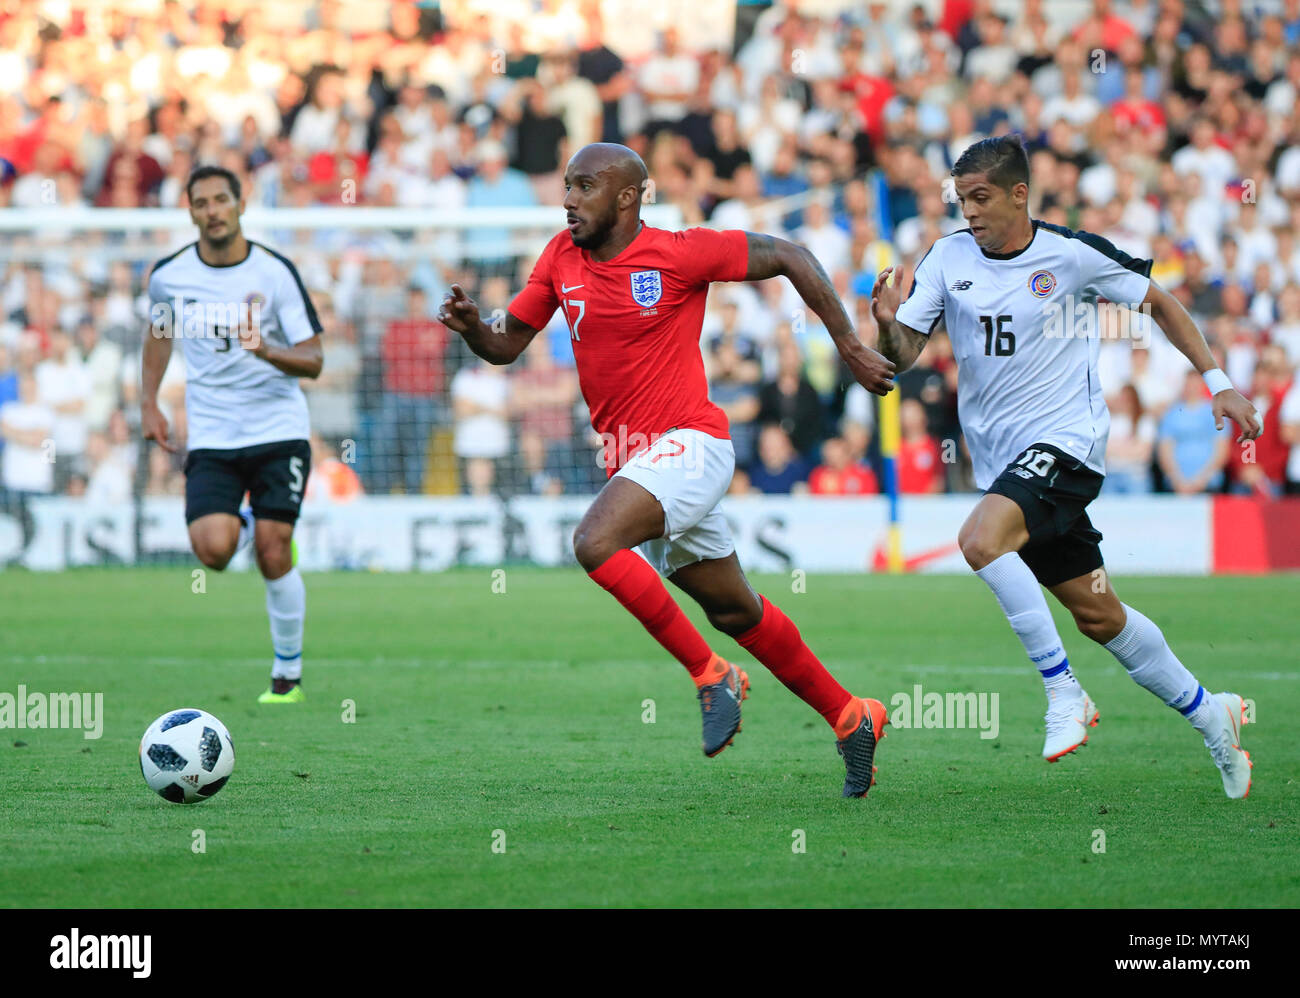 Elland Road, Leeds, UK. 7th June, 2018. International football friendly, England versus Costa Rica; Fabian Delph of England tries to get clear of Cristian Gamboa of Costa Rica Credit: Action Plus Sports/Alamy Live News Stock Photo